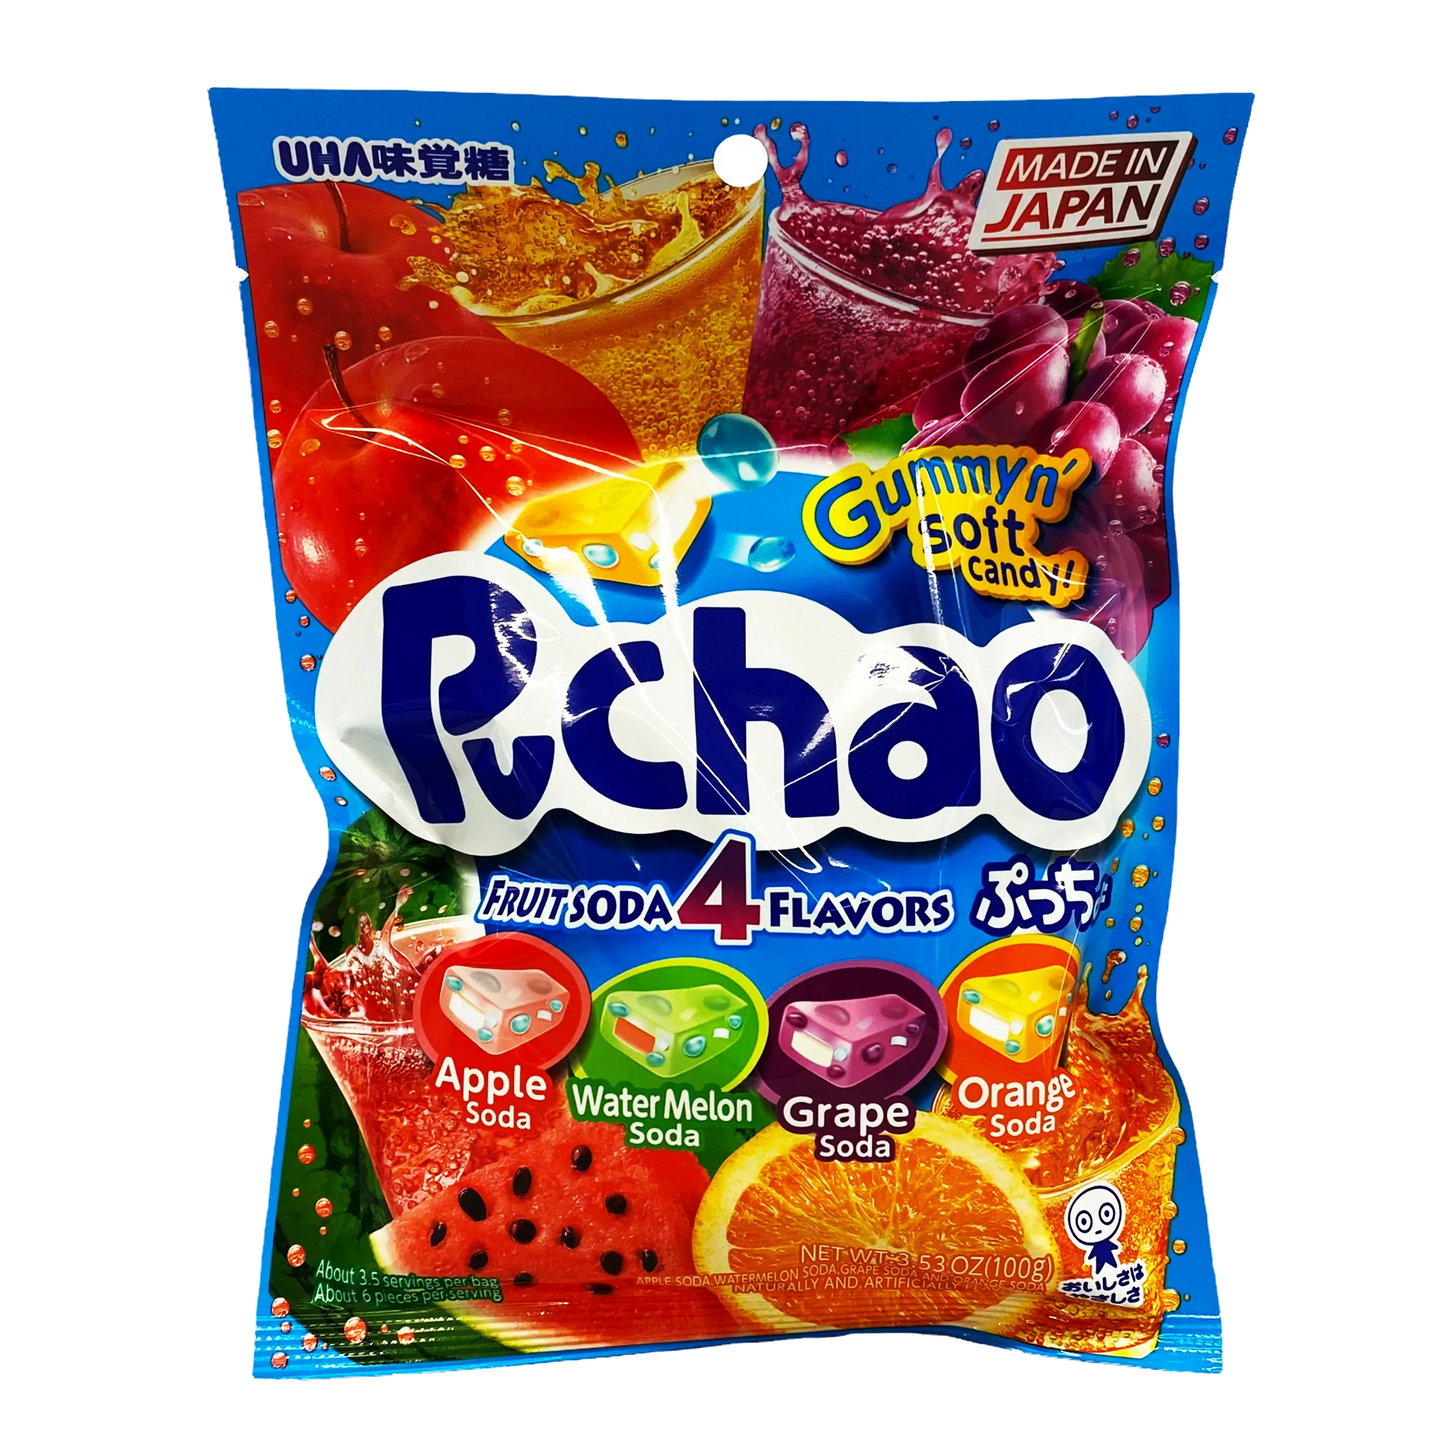 Puchao - Gummyn' Soft Candy - Fruit Soda 4 Flavors - Product of Japan